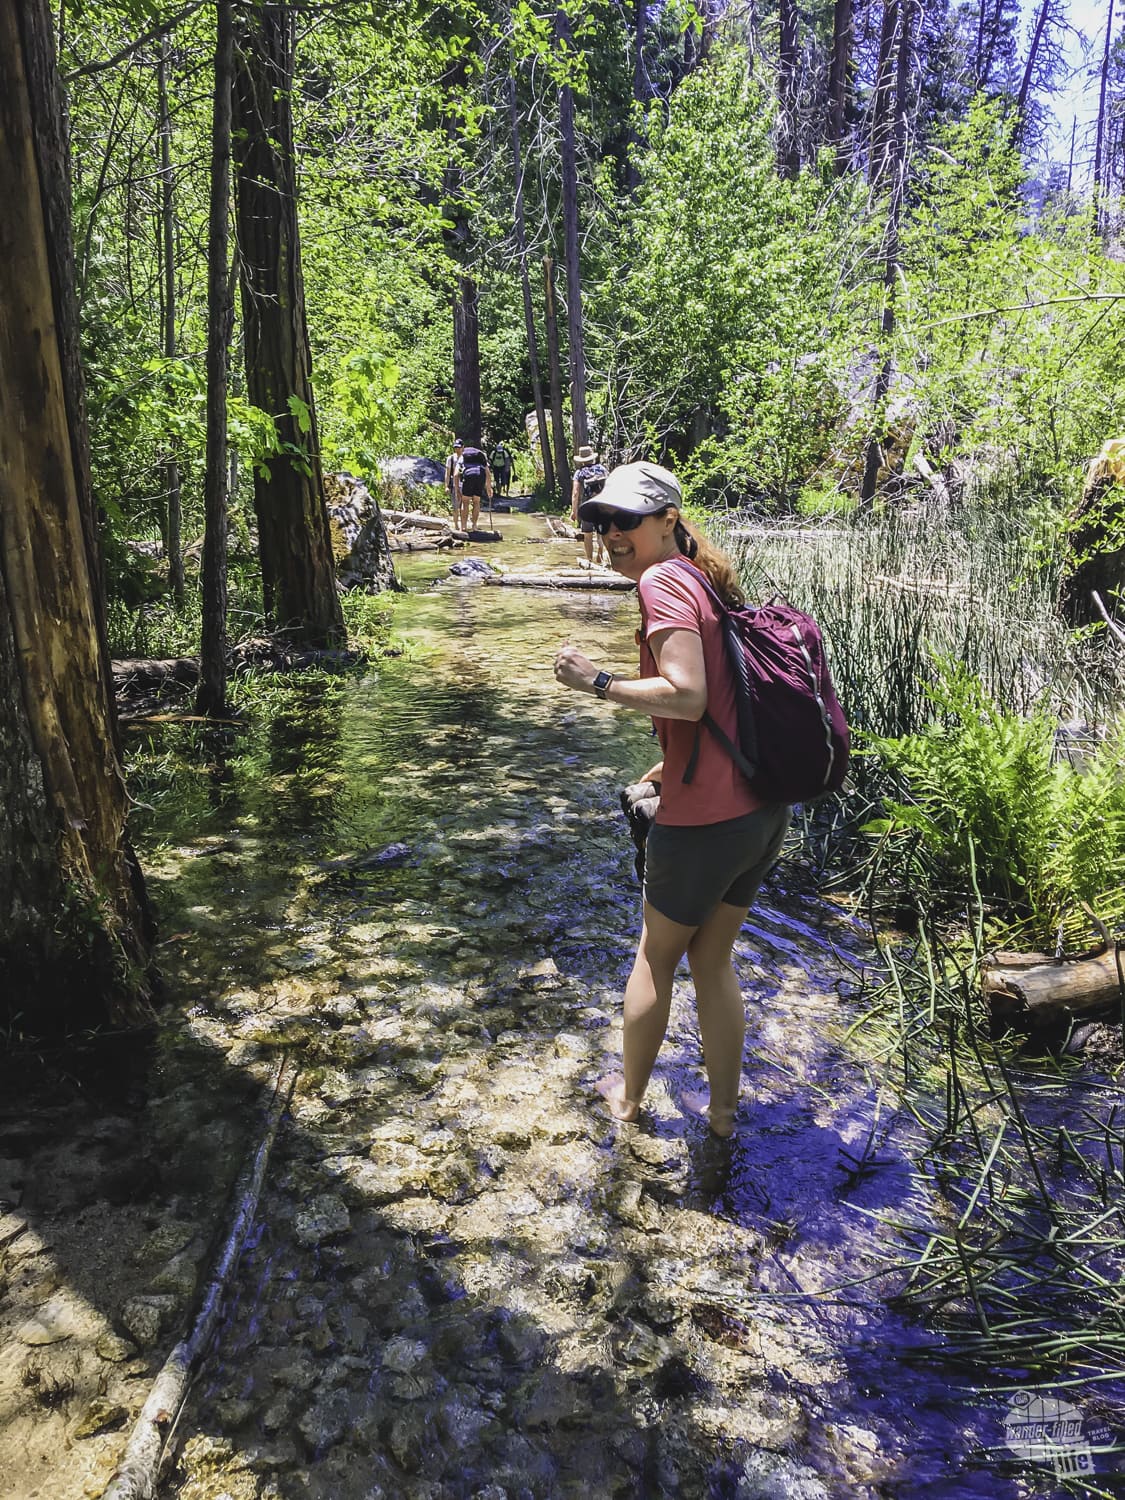 A cold water crossing on the Yosemite Valley Loop trail.